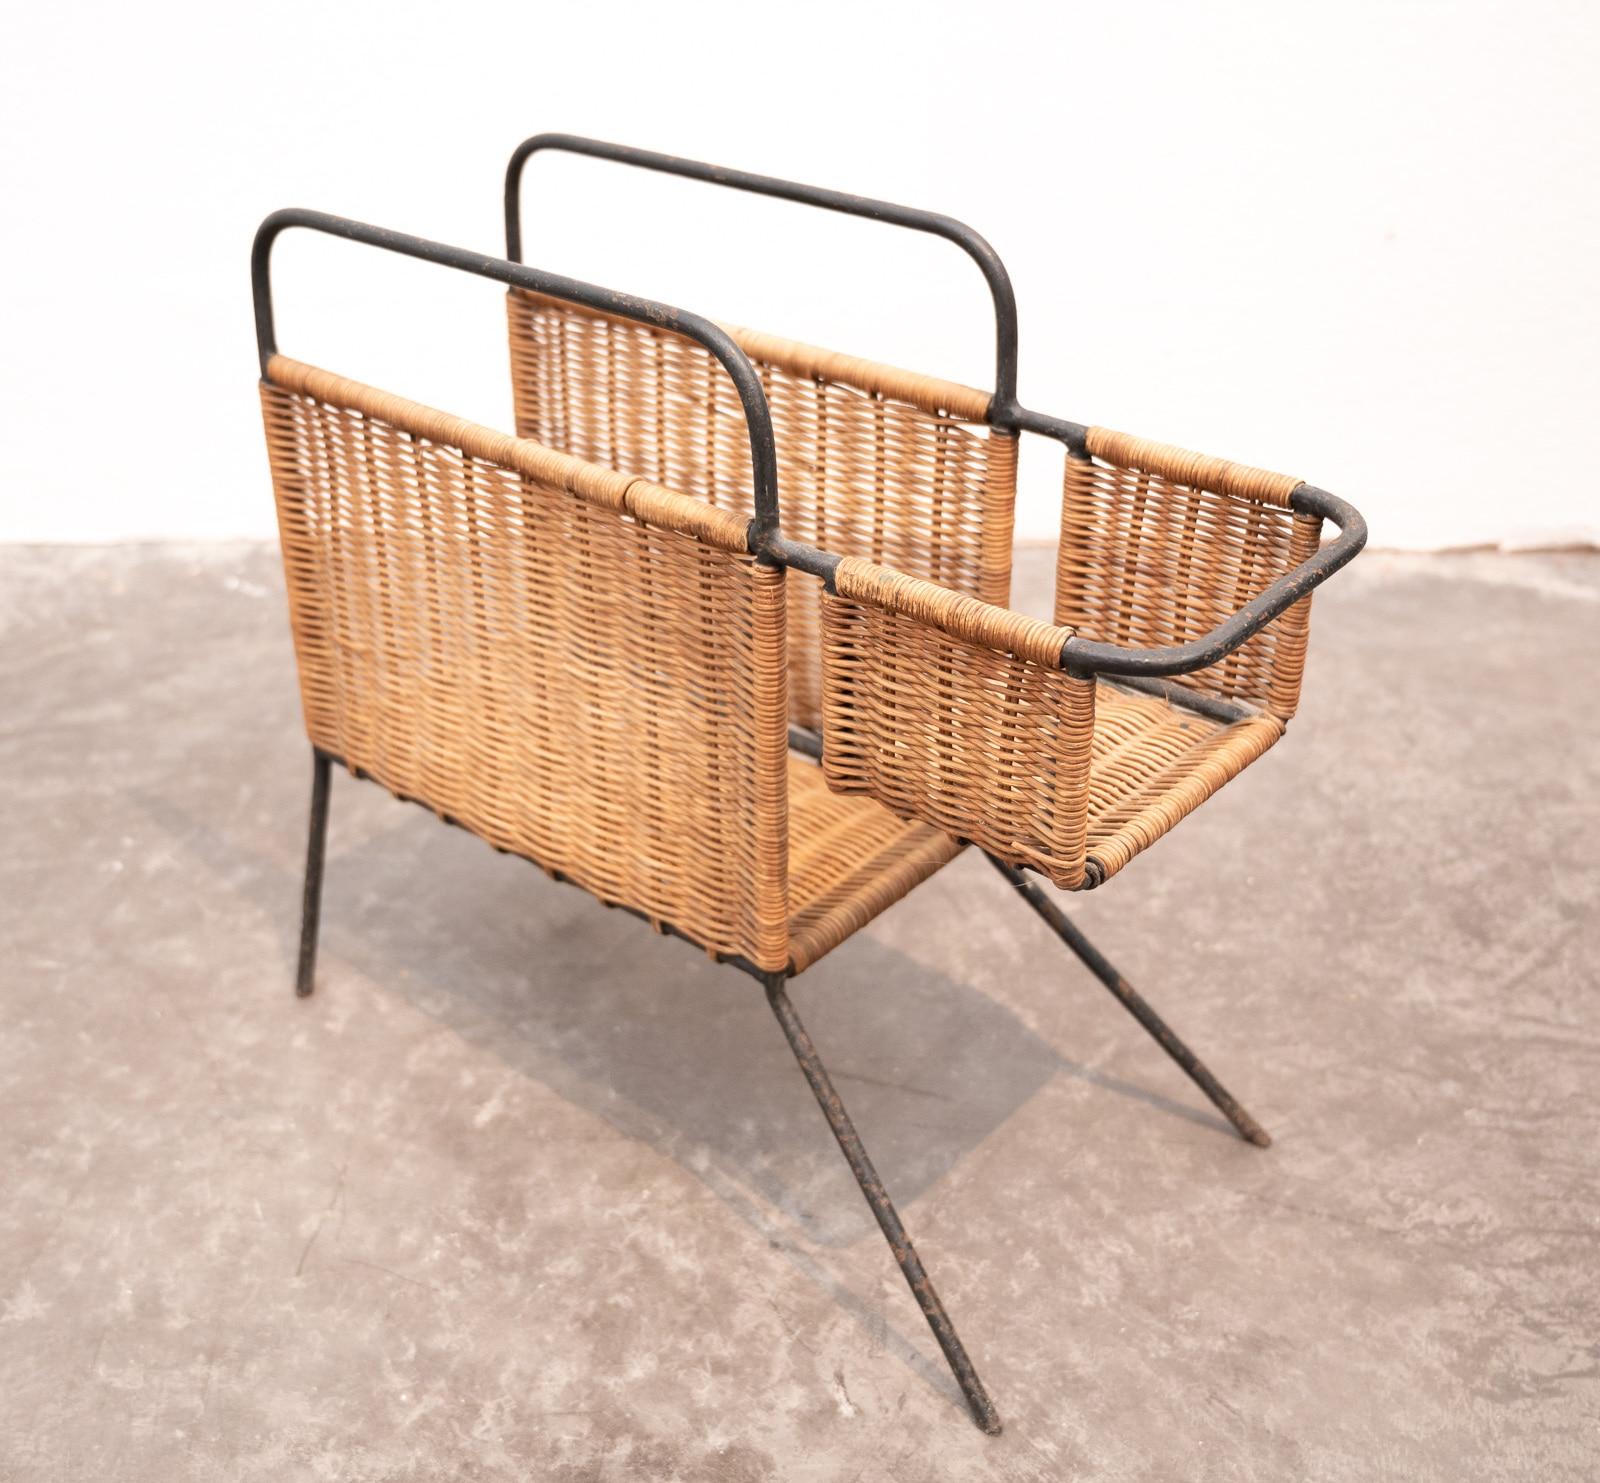 Mid-20th Century Raoul Guys Attributed Metal and Rattan Canine Inspired Magazine Holder For Sale